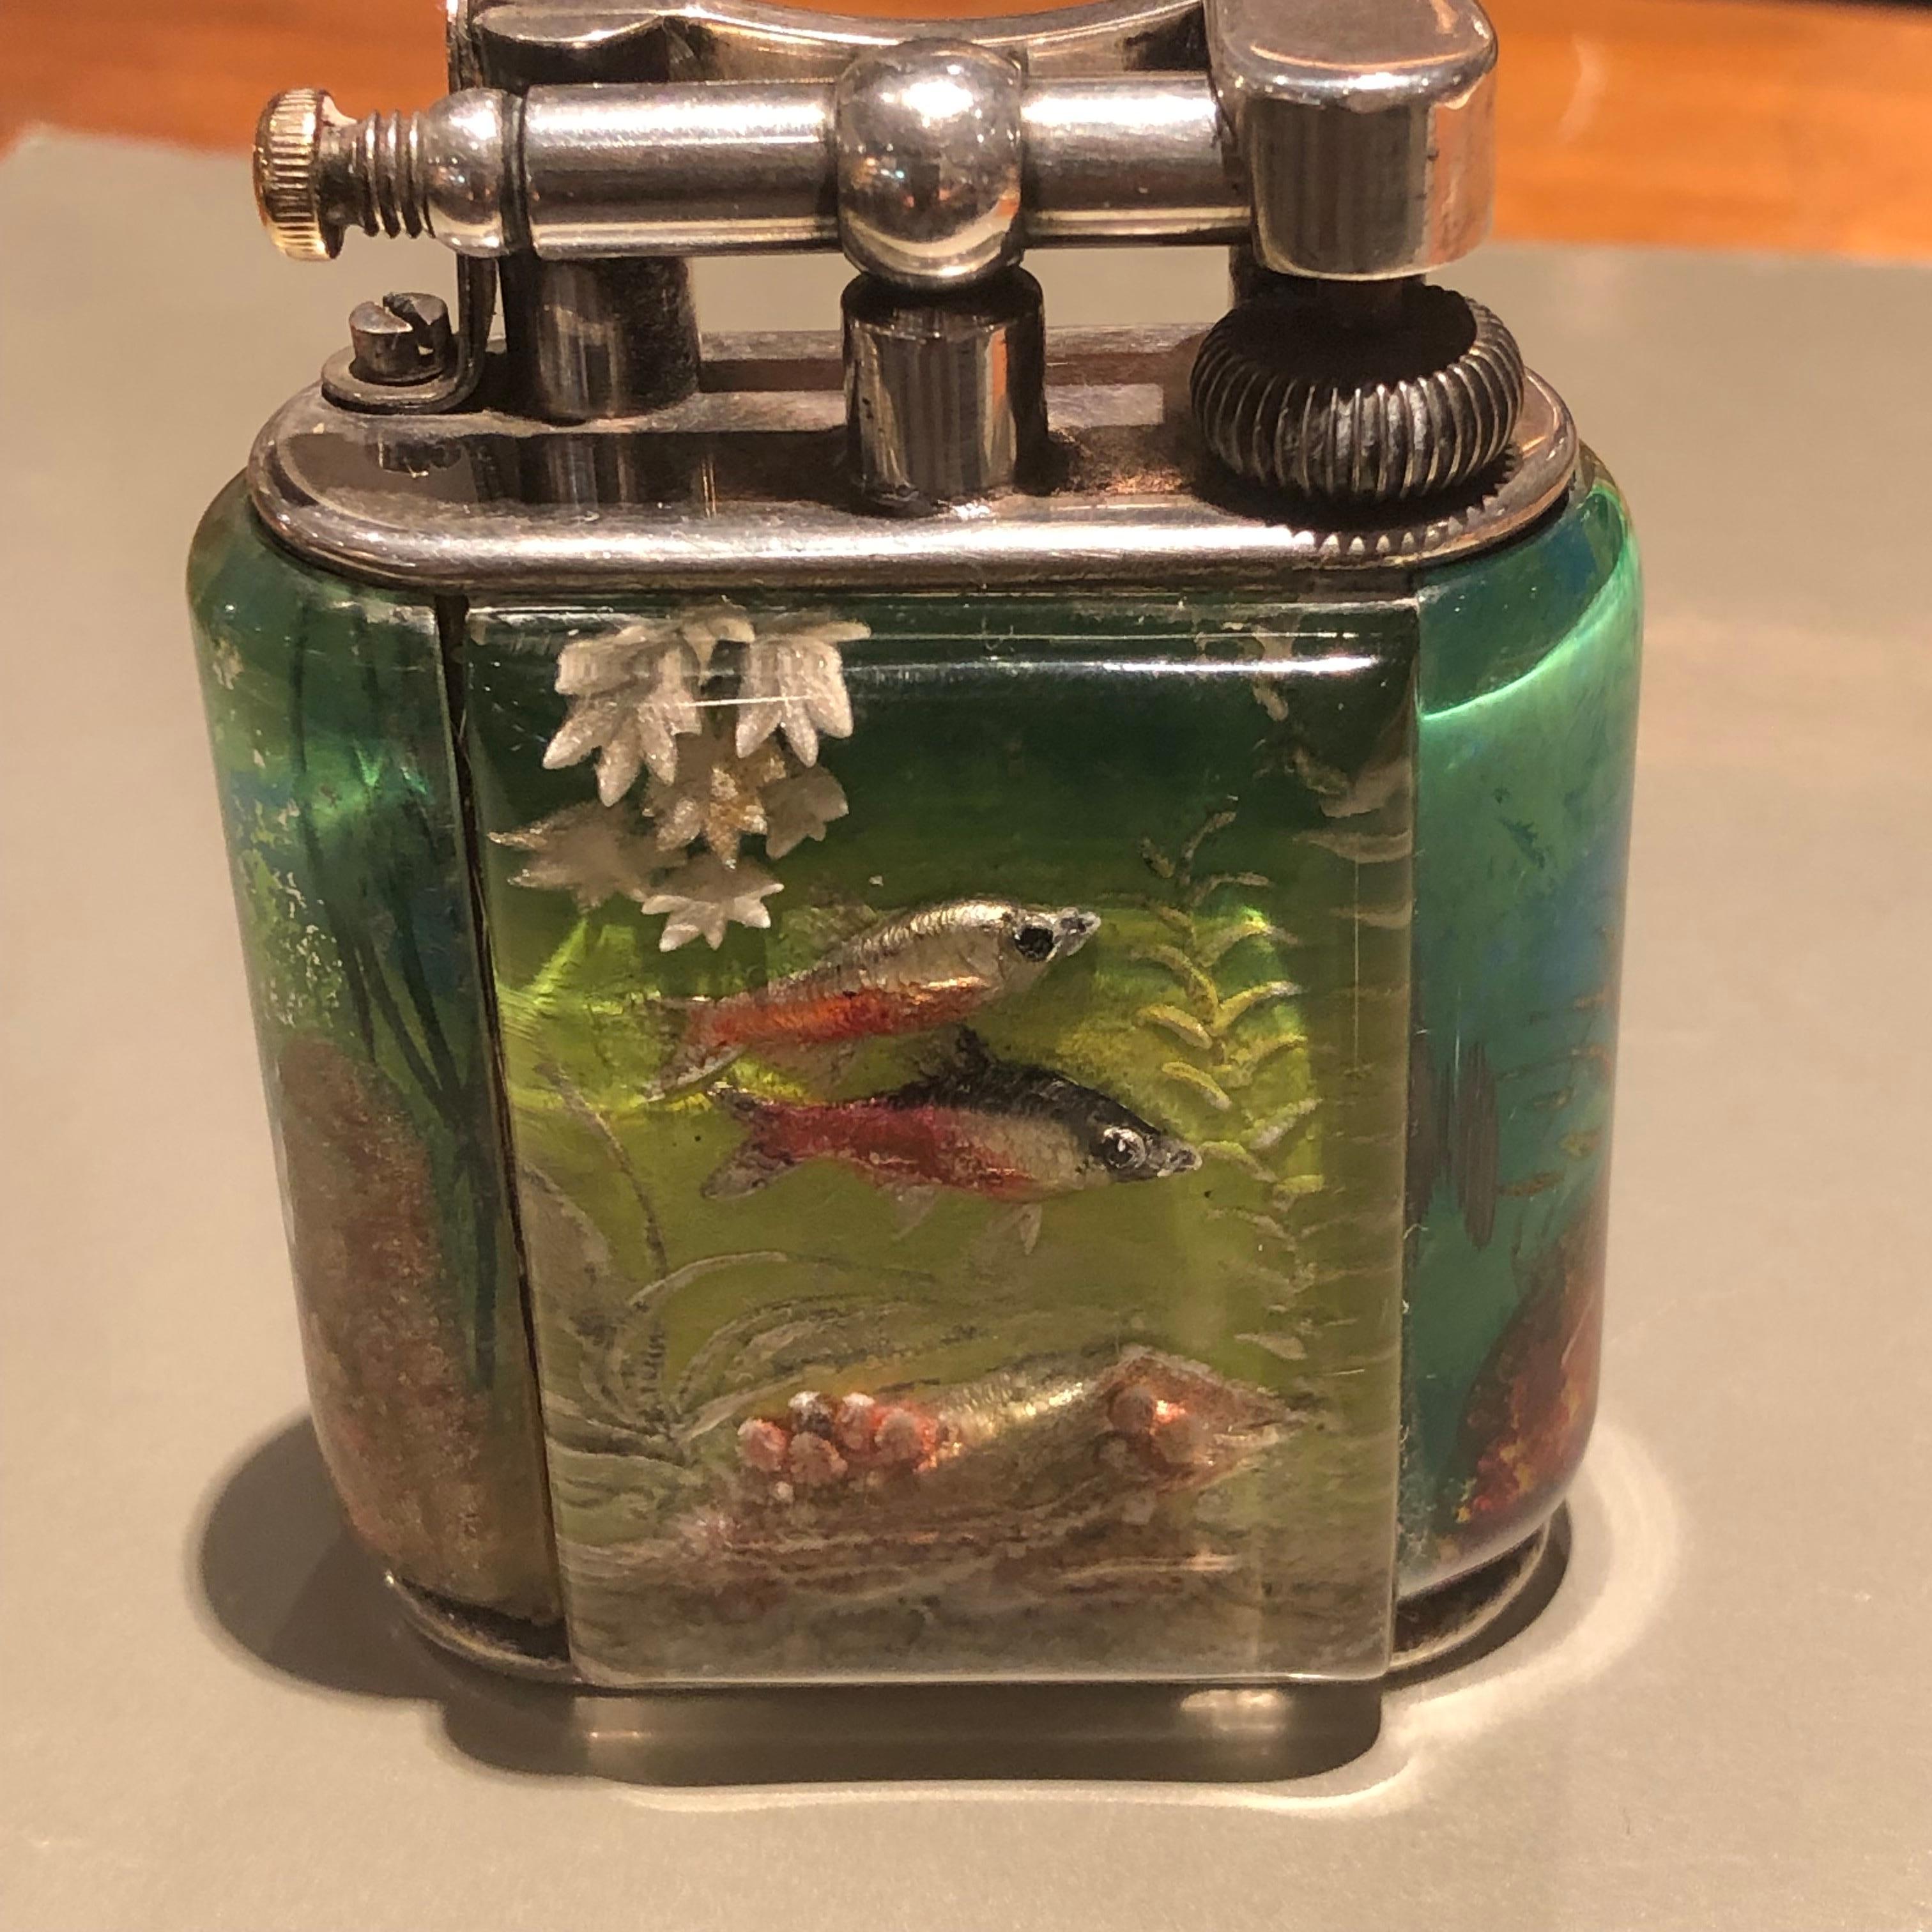 One of the most iconic lighters from Dunhill. The aquarium lighter has garnered an extraordinary reputation as one of the most unique luxury items to own.

Ben Shillingford (1904-2000) worked for Dunhill in the 1950s and perfected the art of